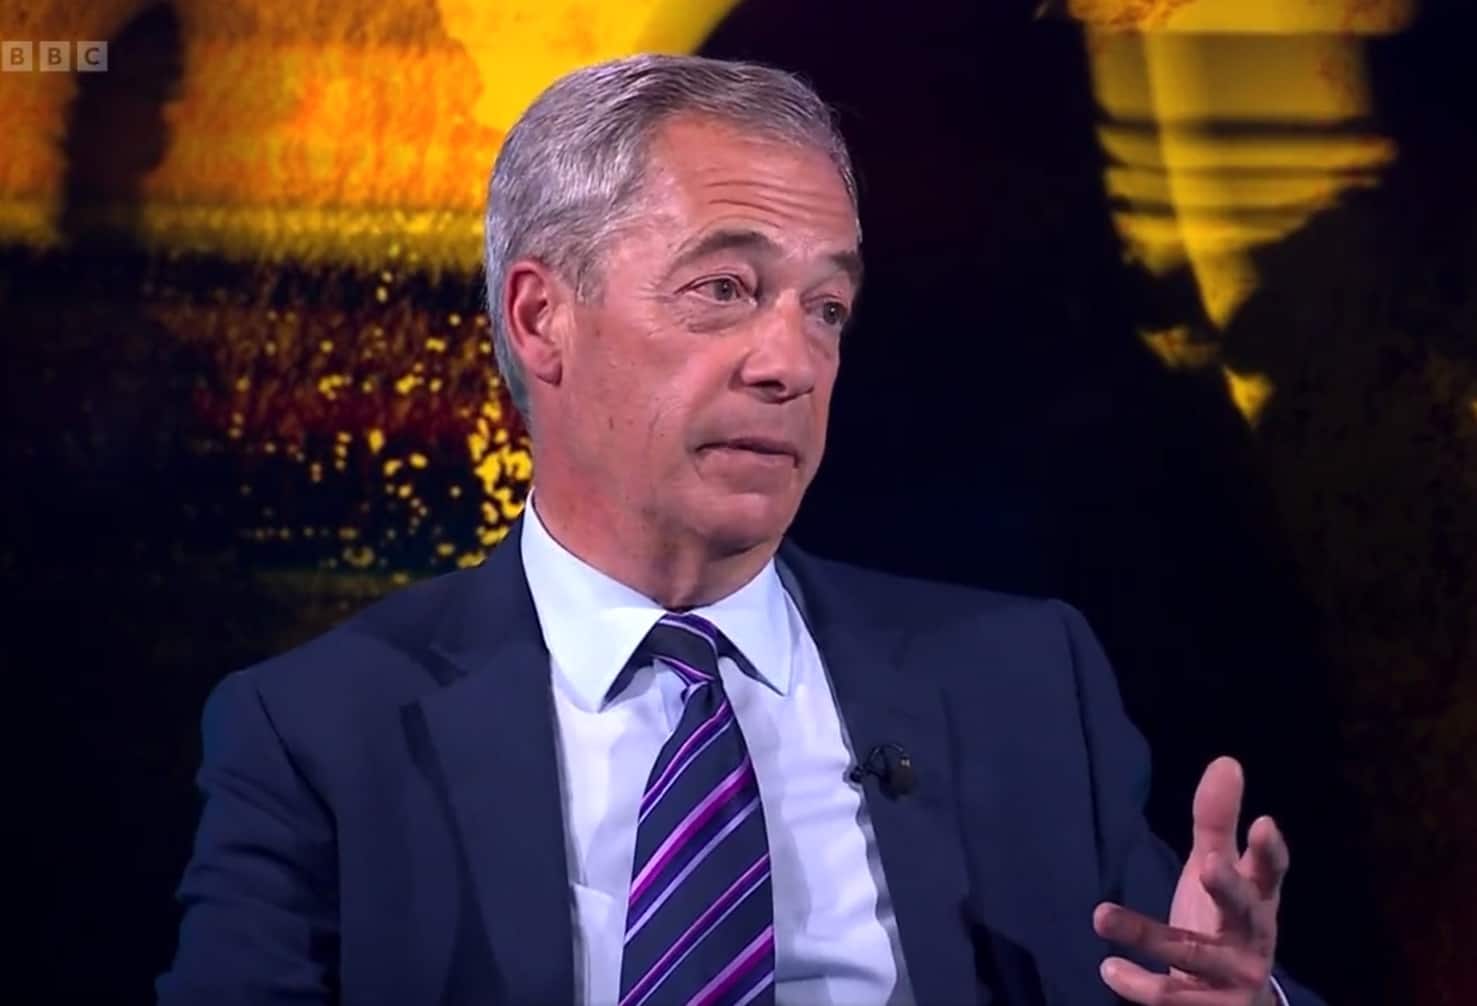 Nigel Farage says Brexit is in crisis, but it ‘isn’t my fault’